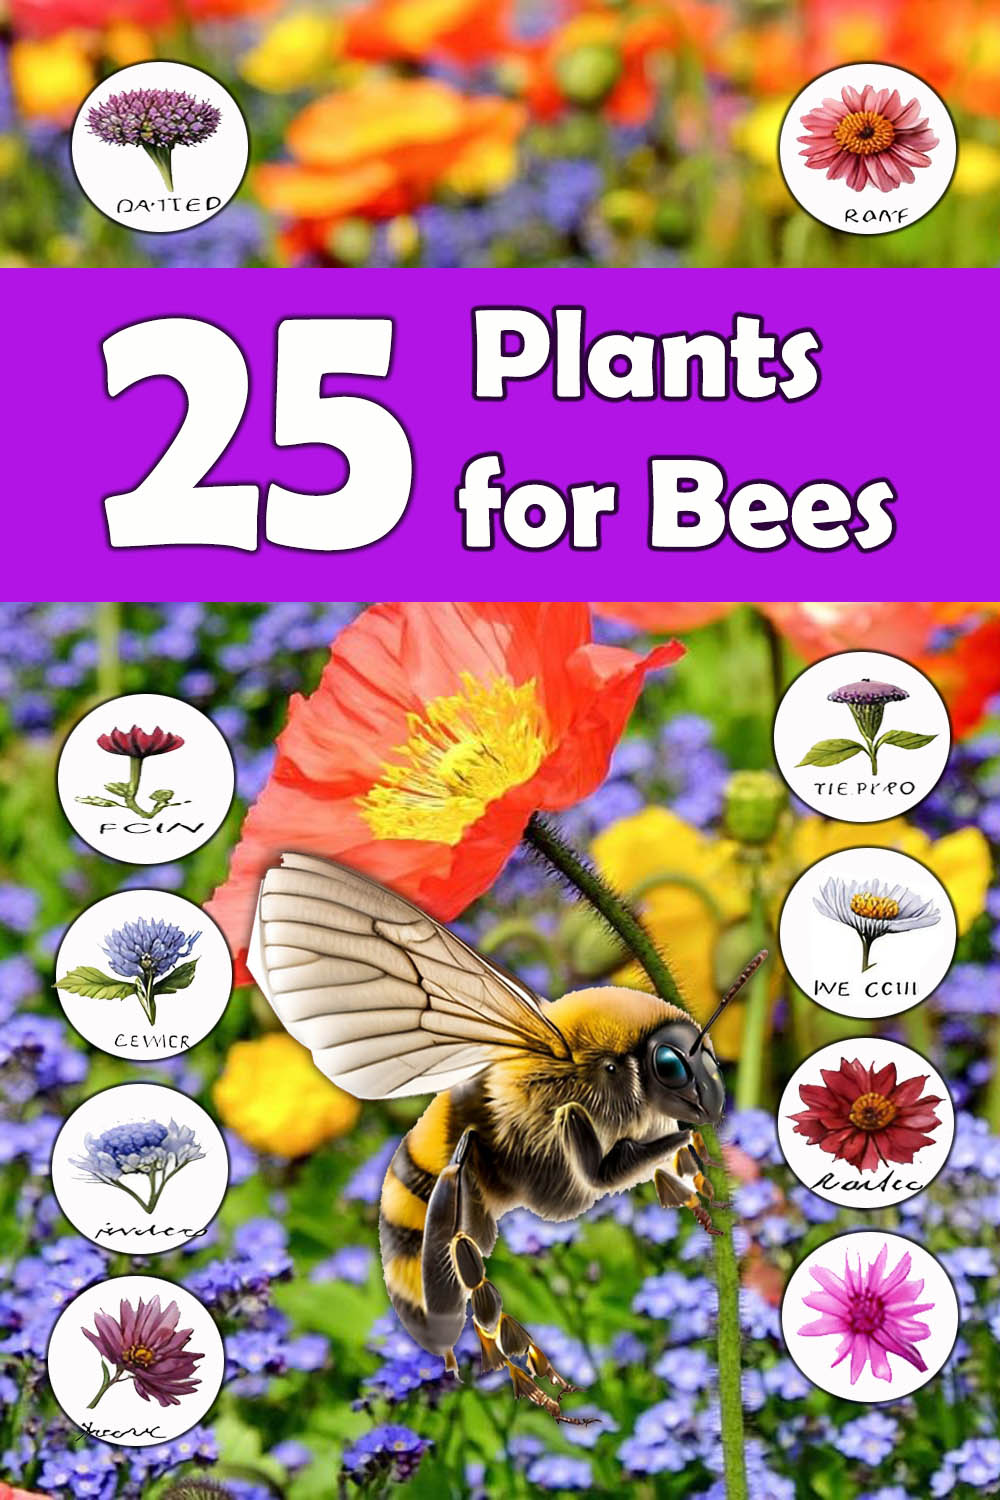 Plants for bees